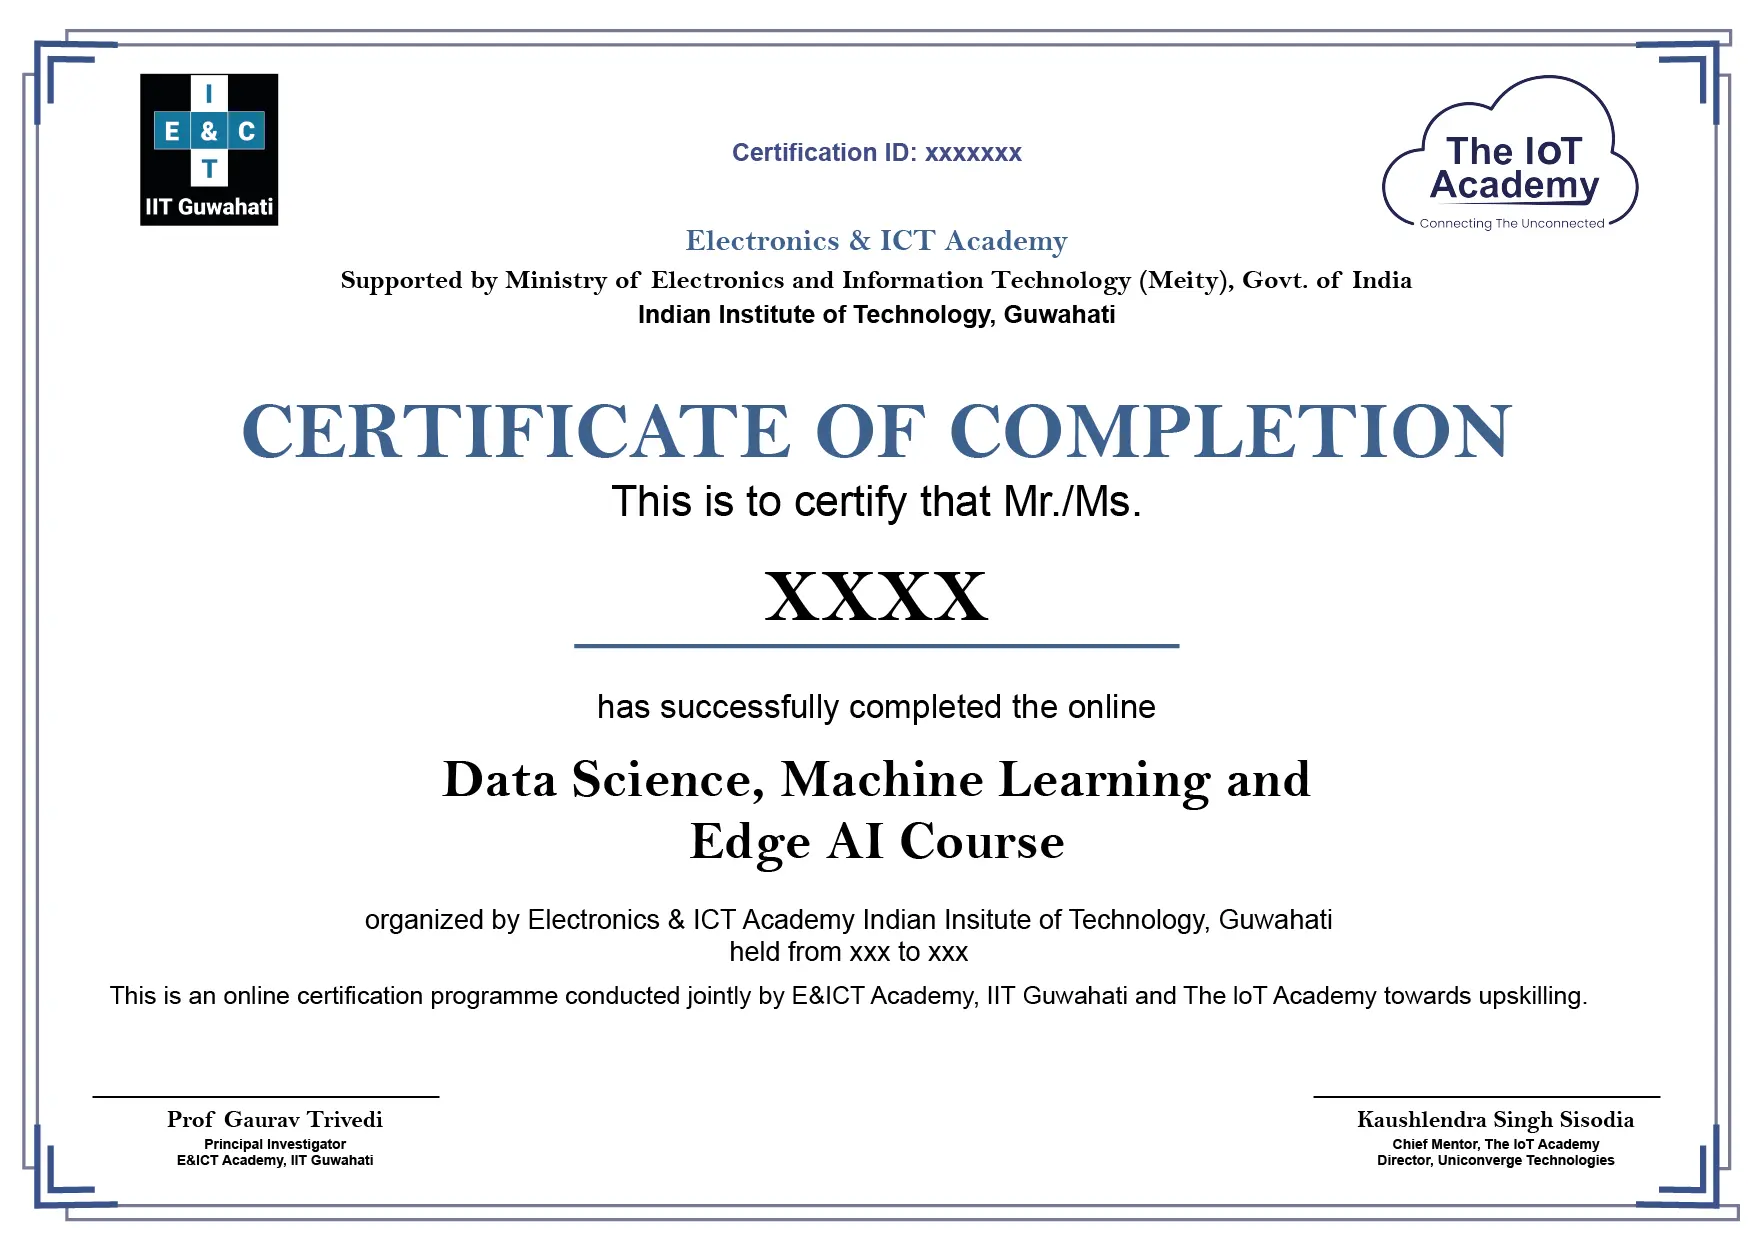 data science, machine learning and edge ai certificate